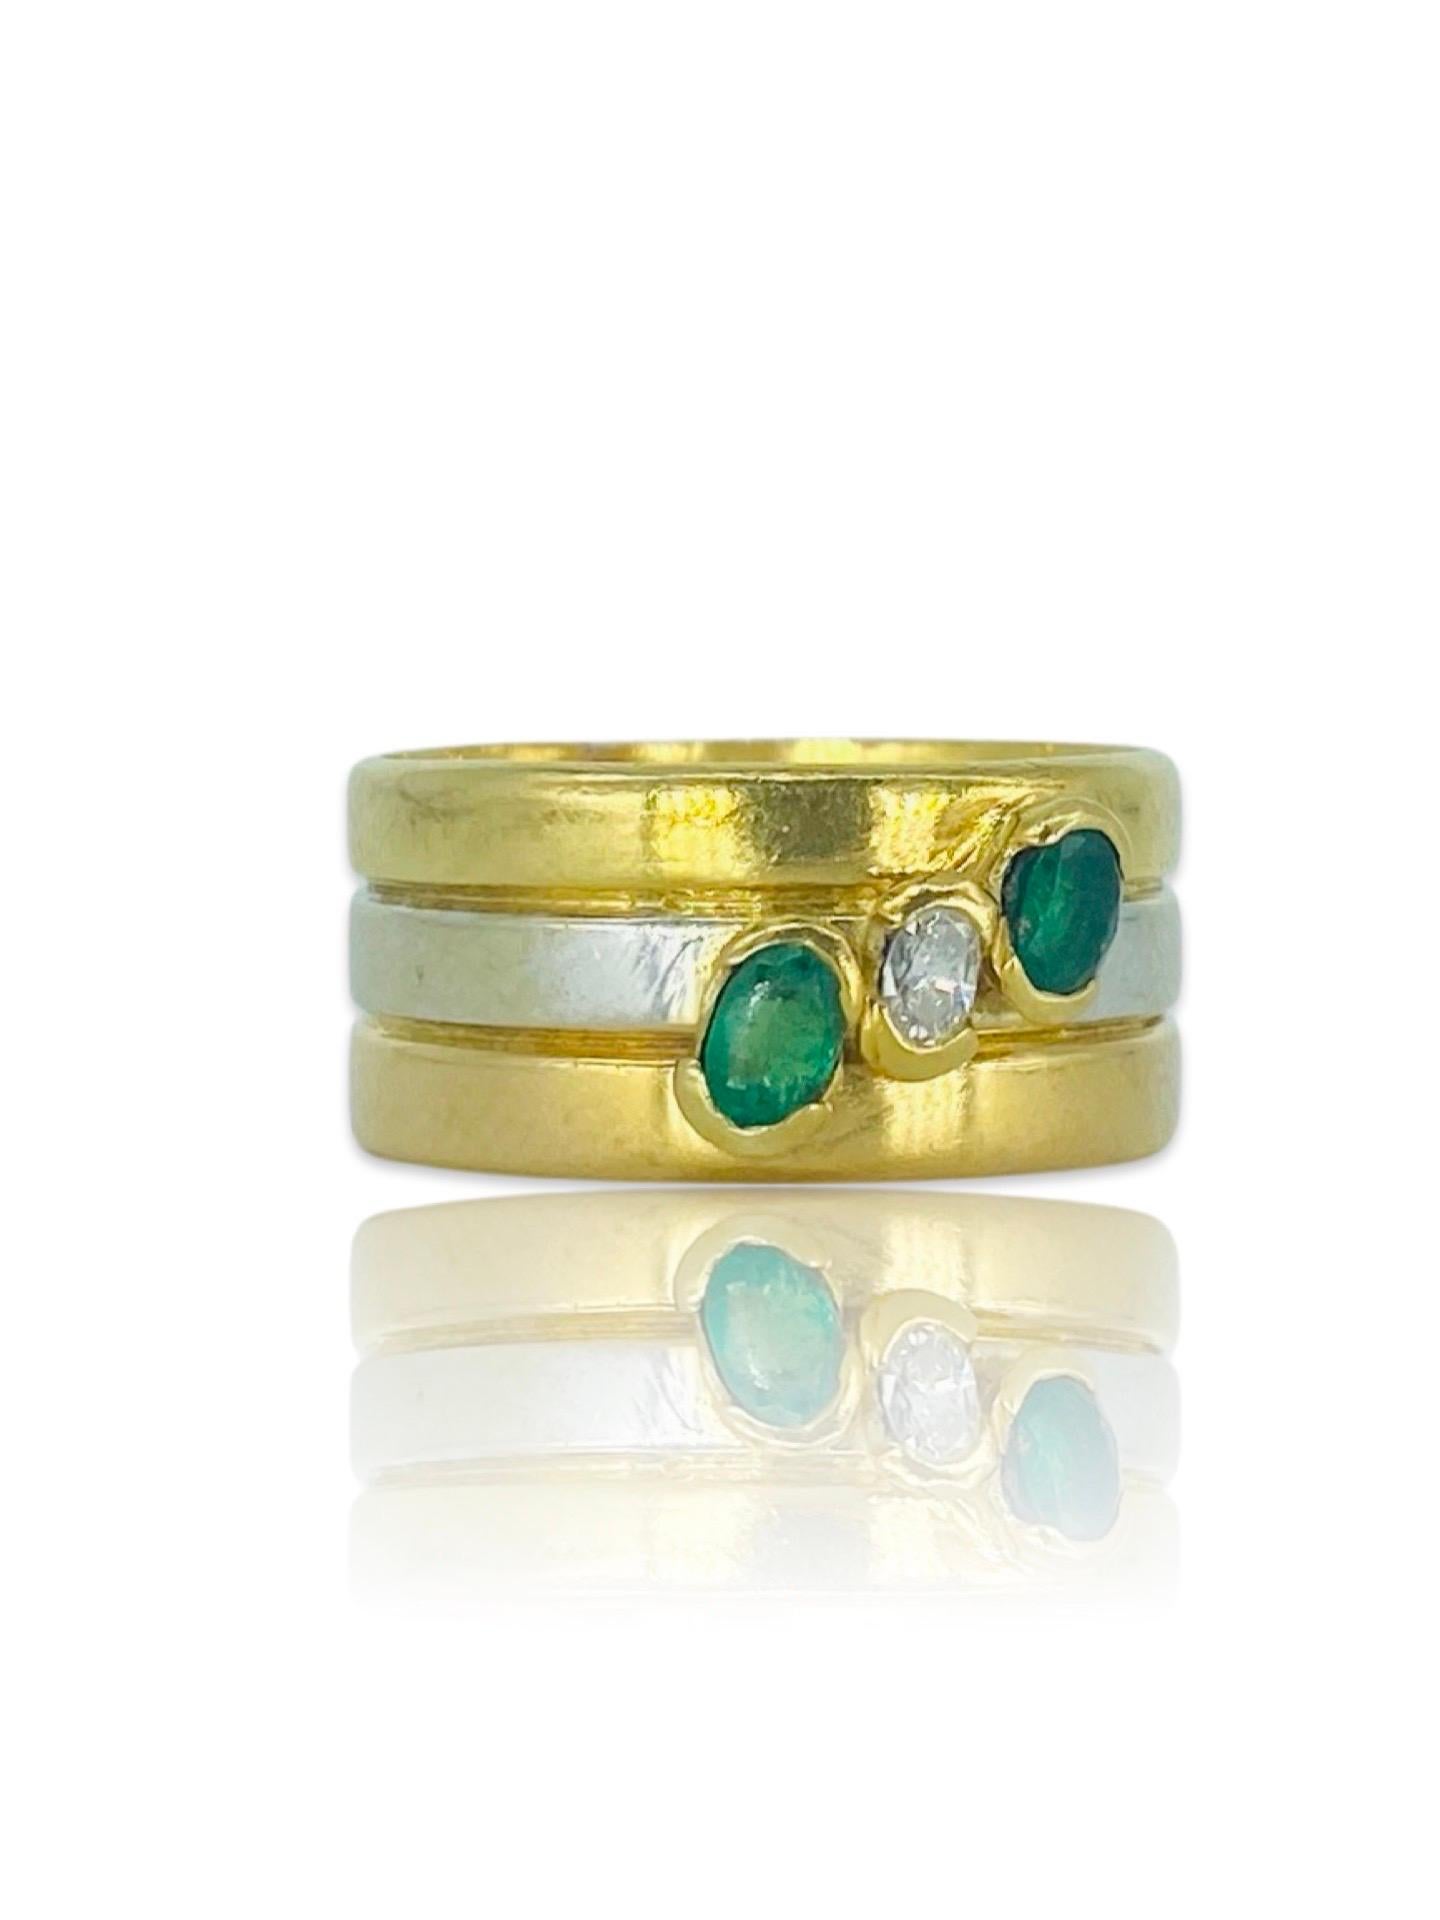 Oval Cut Vintage 0.50 Carat Oval Emeralds & Diamond3-Row Tricolor Gold Band Ring 18k For Sale